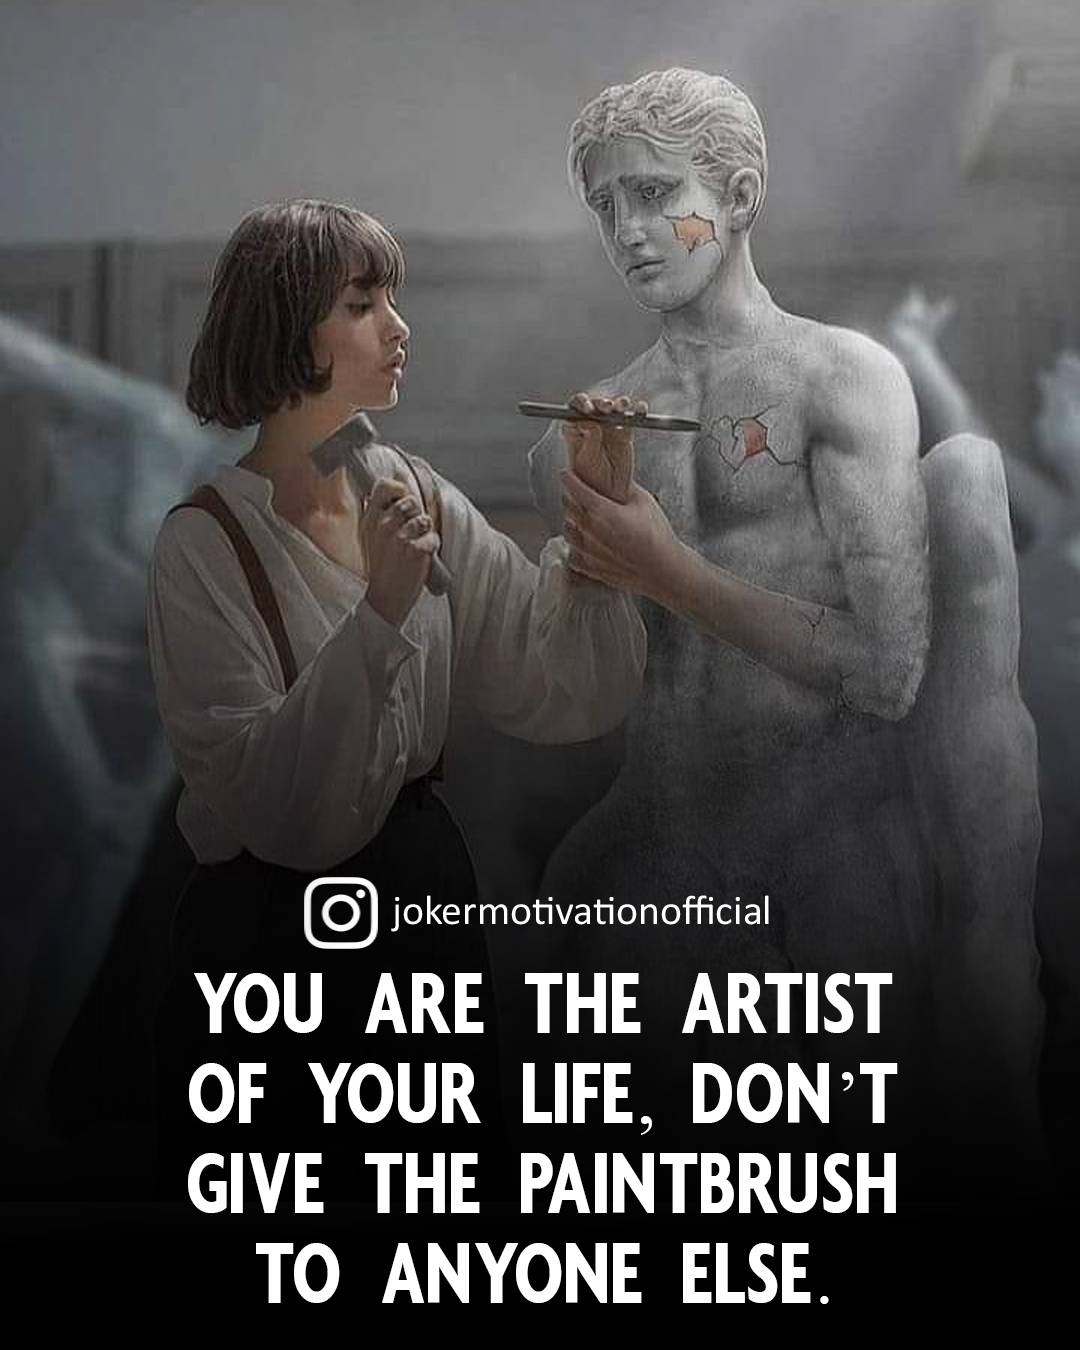 You are the artist of your life don’t give the paintbrush to anyone else.